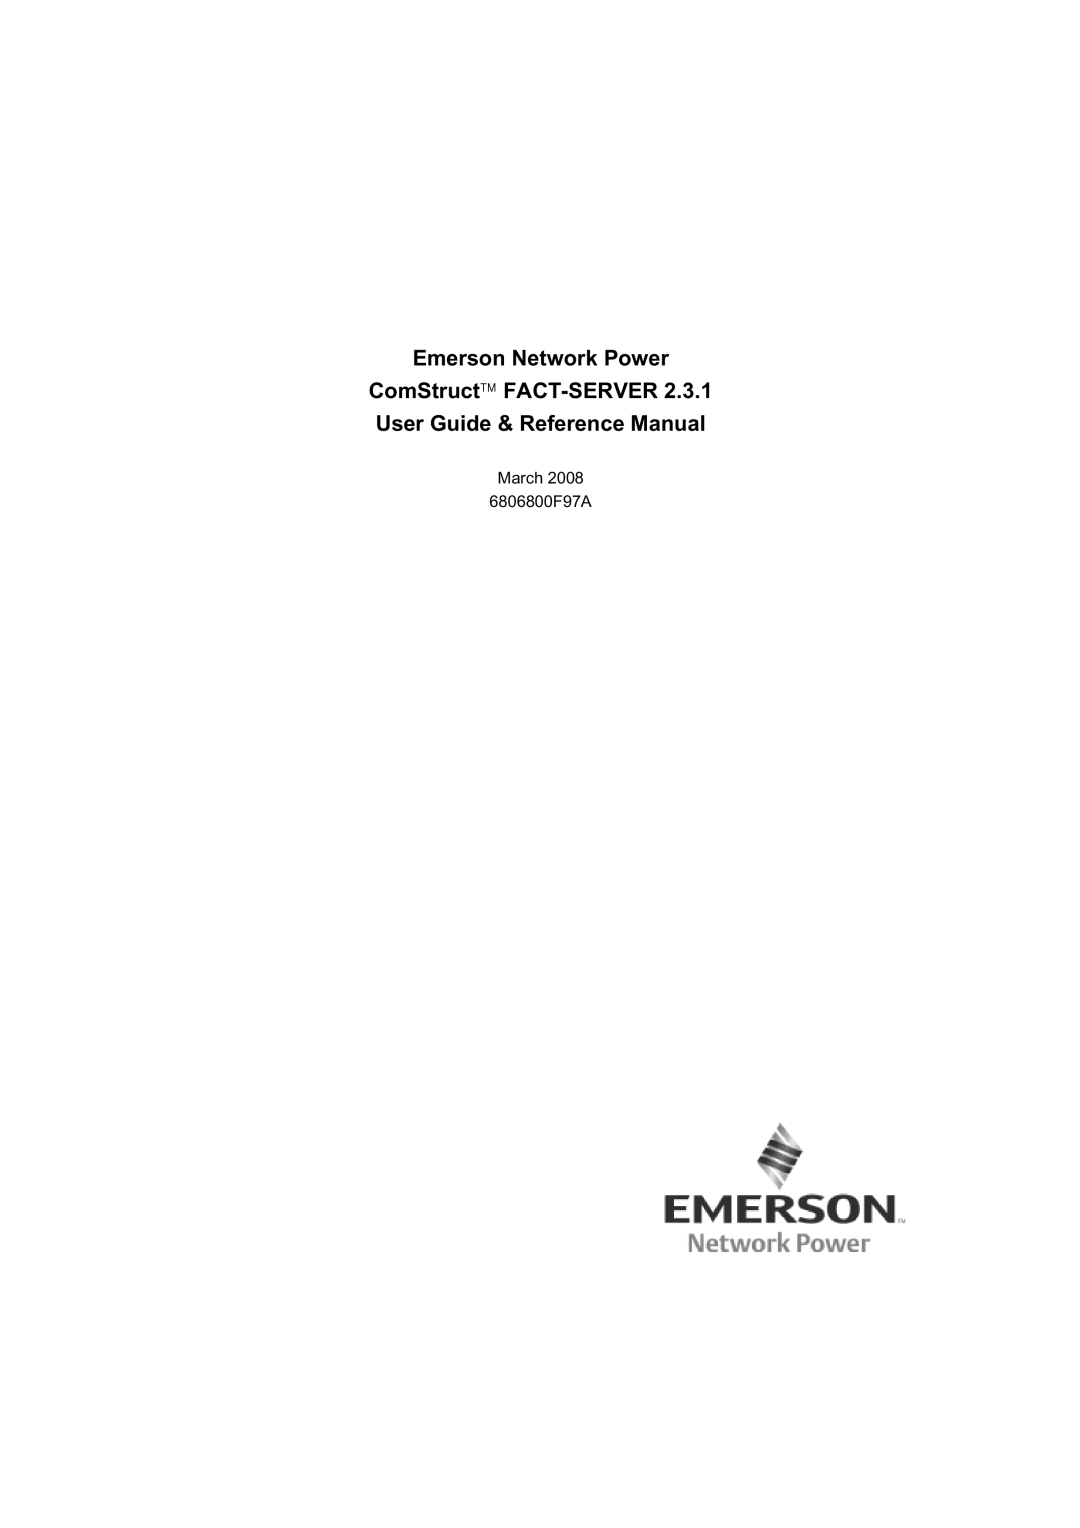 Emerson 6806800F97A manual Emerson Network Power ComStruct FACT-SERVER2.3.1, User Guide & Reference Manual 